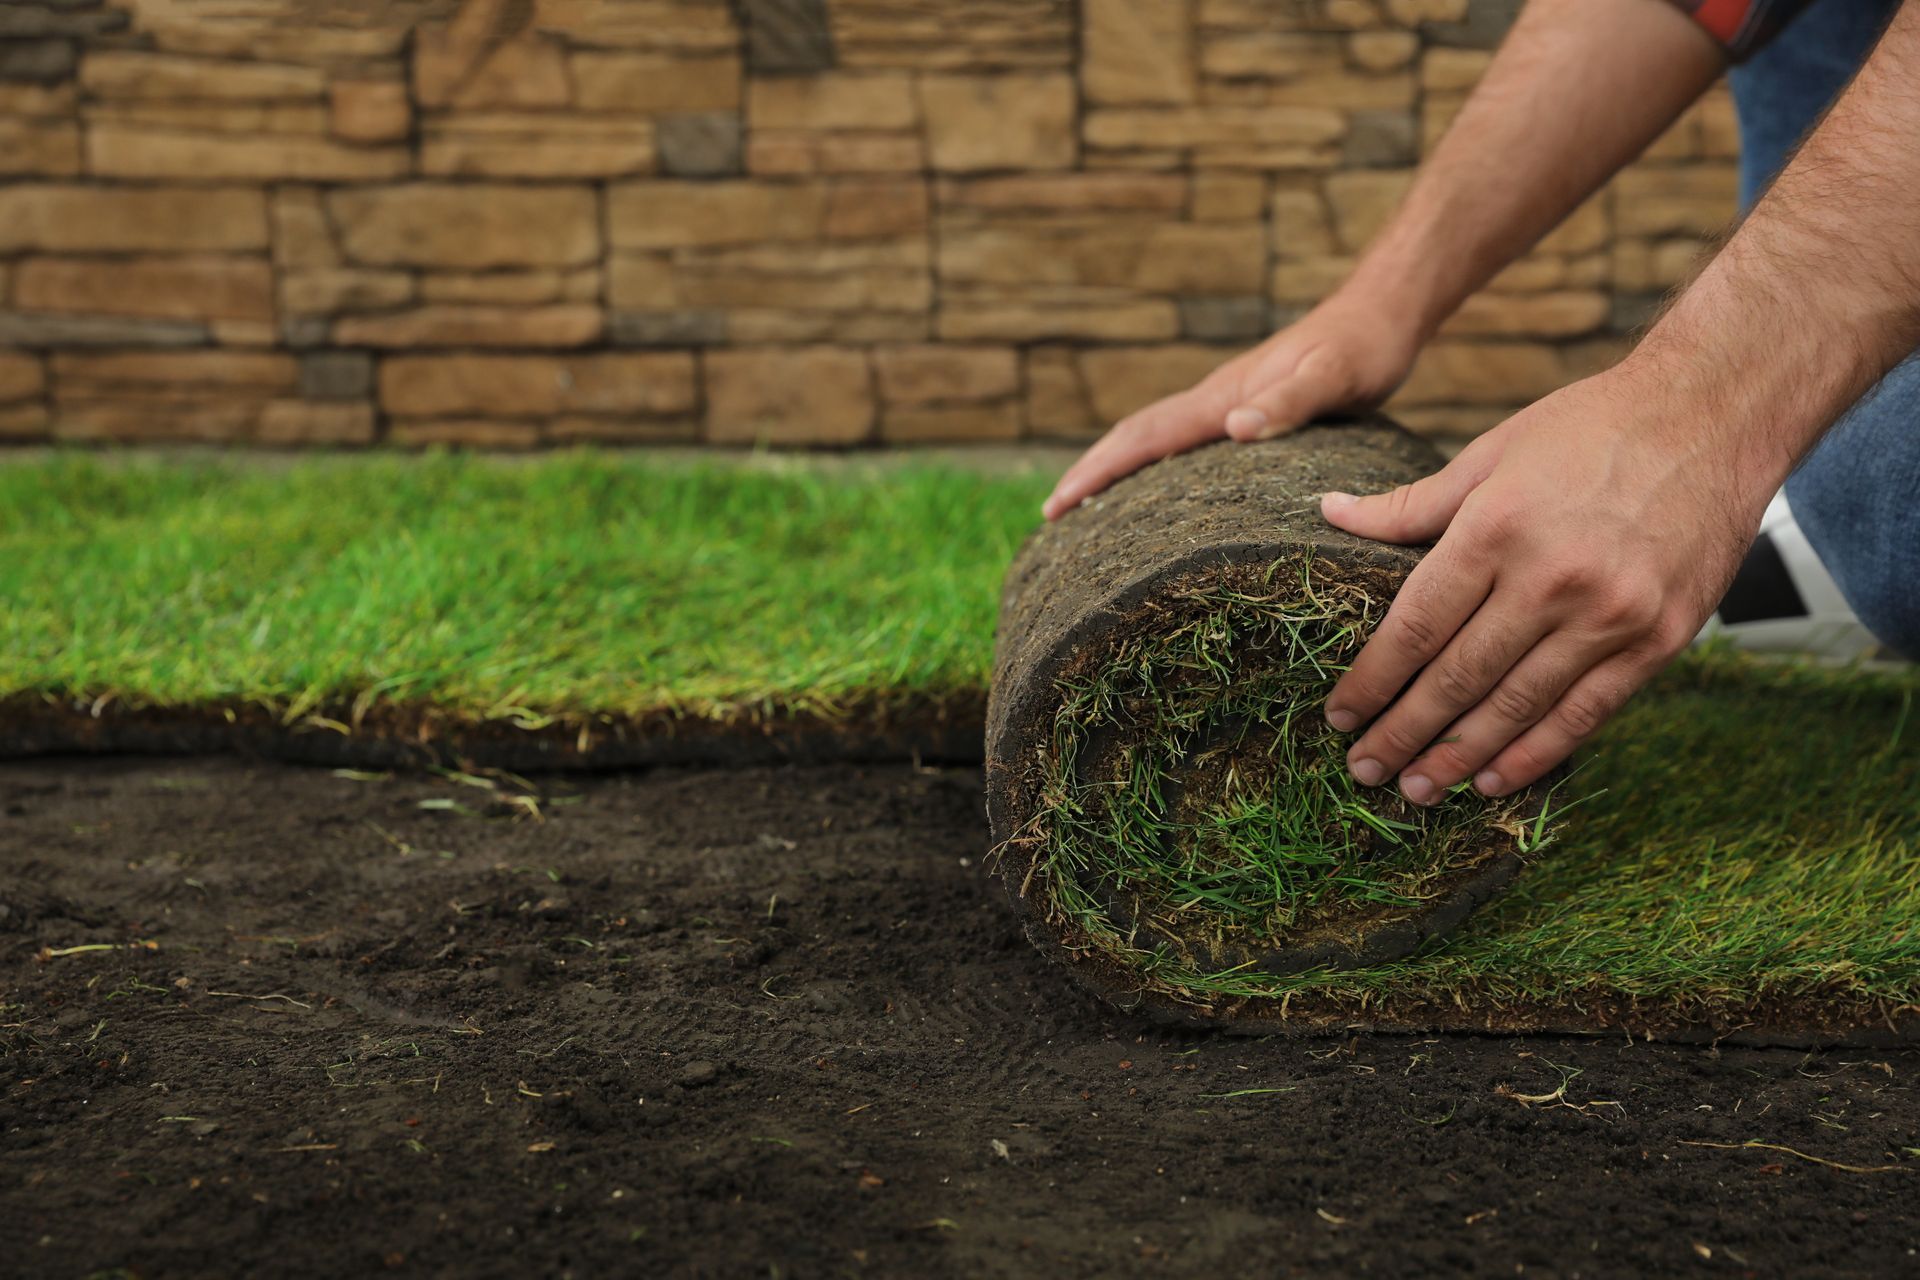 resodding and replanting your lawn